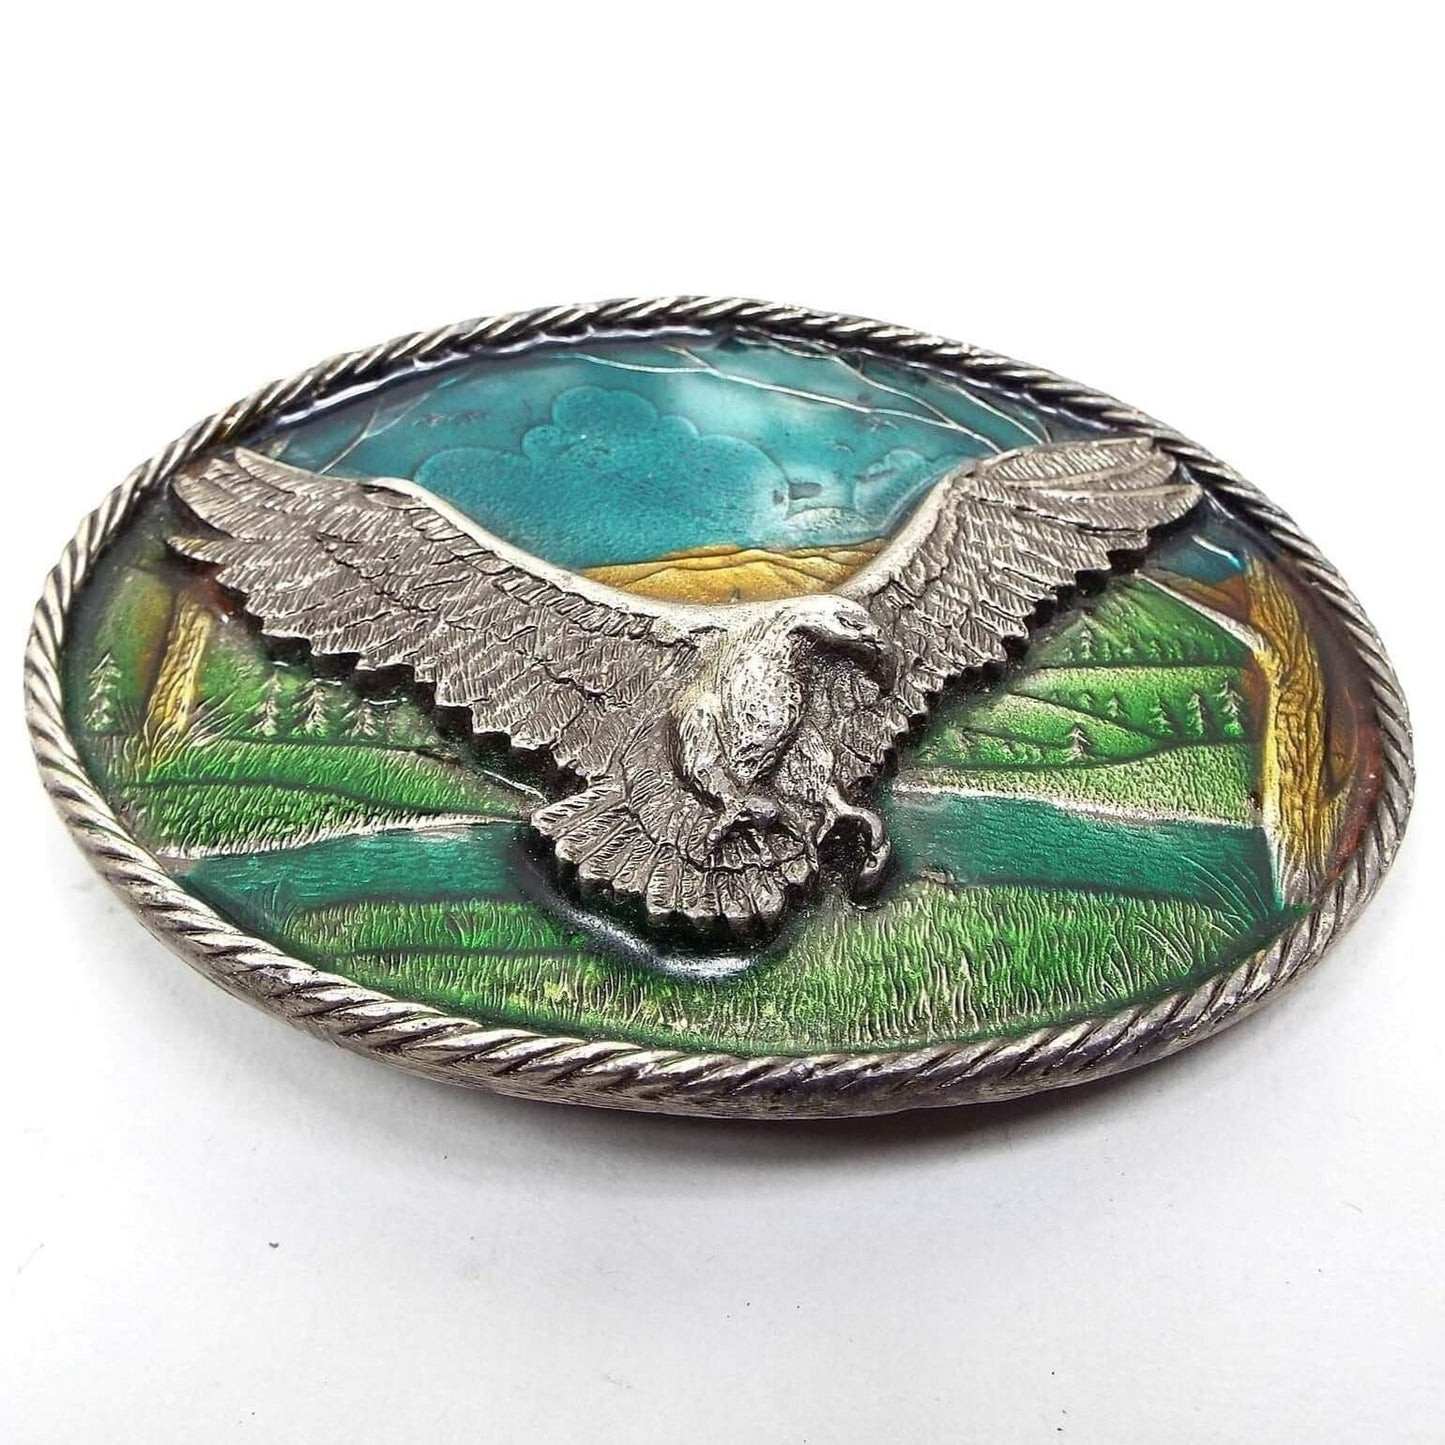 Front view of the retro vintage belt buckle from The Great American Buckle Company. The buckle is a gray pewter oval with braided edge. The design is detailed and textured with a flying eagle with its wings spread in the middle. The background is an enameled scenery of grass, trees, and sky, in shades of blue, green, and brown. 